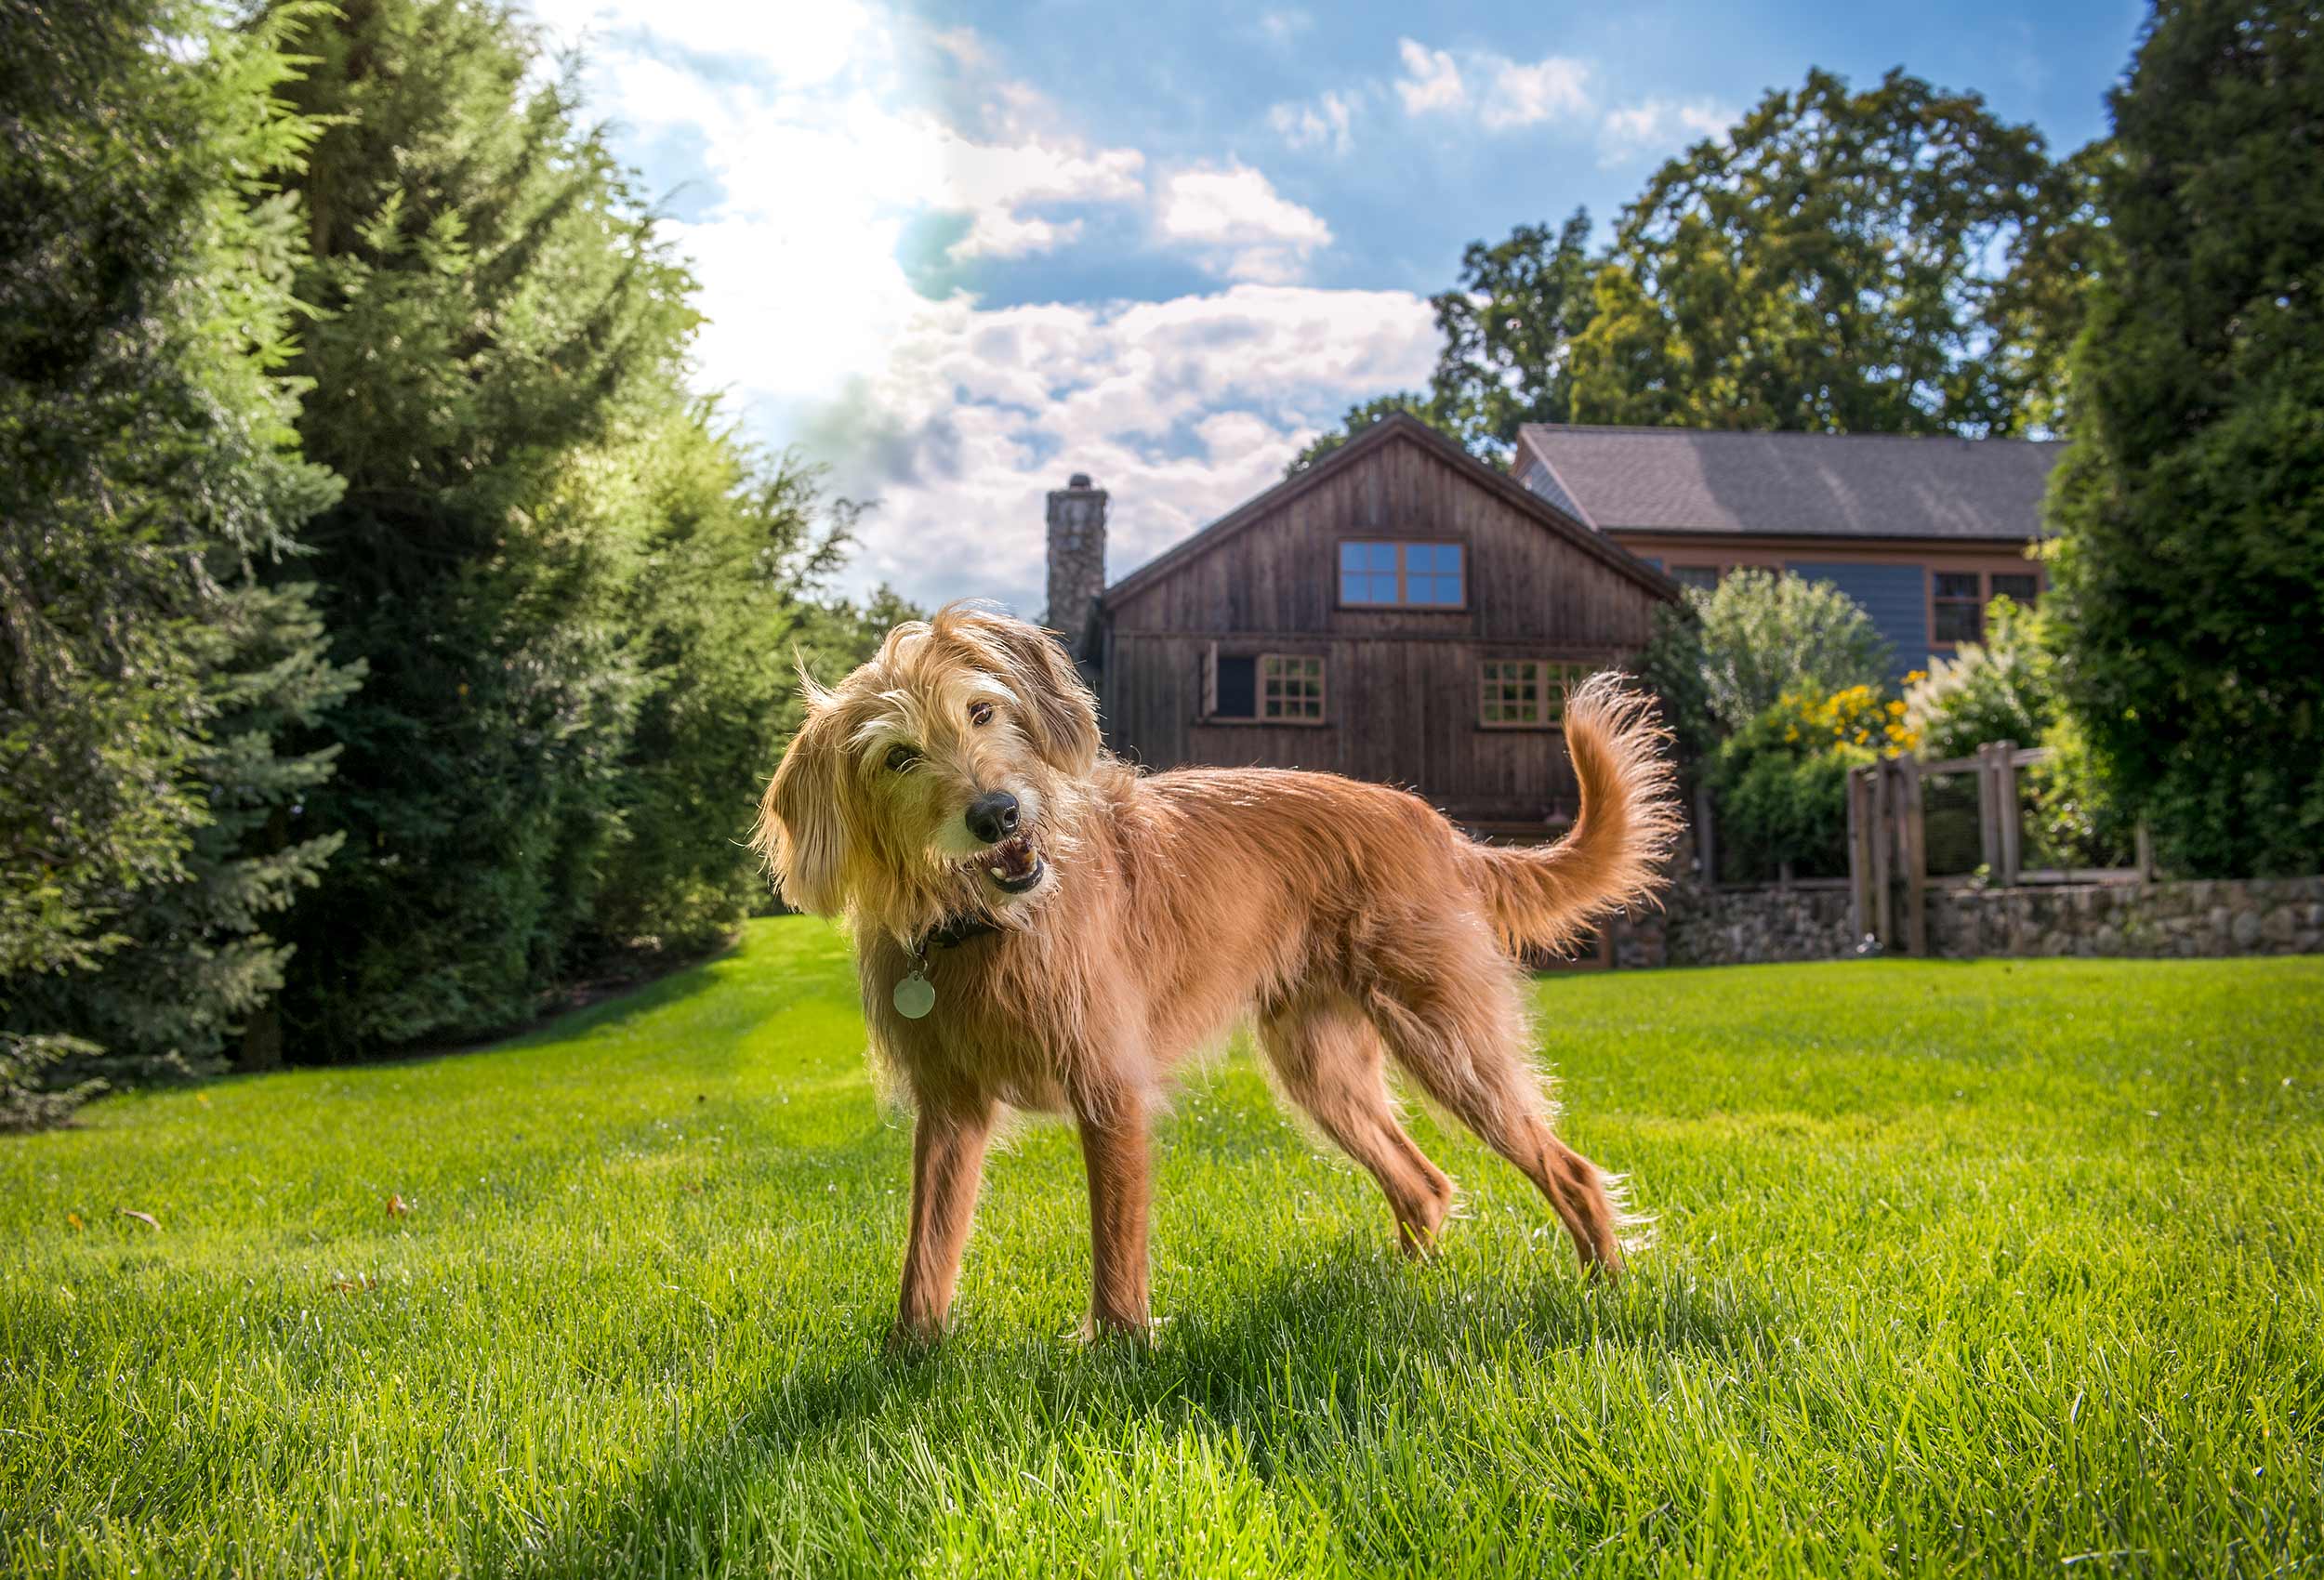 Scruffy brown dog on lush green lawn with farmhouse in background